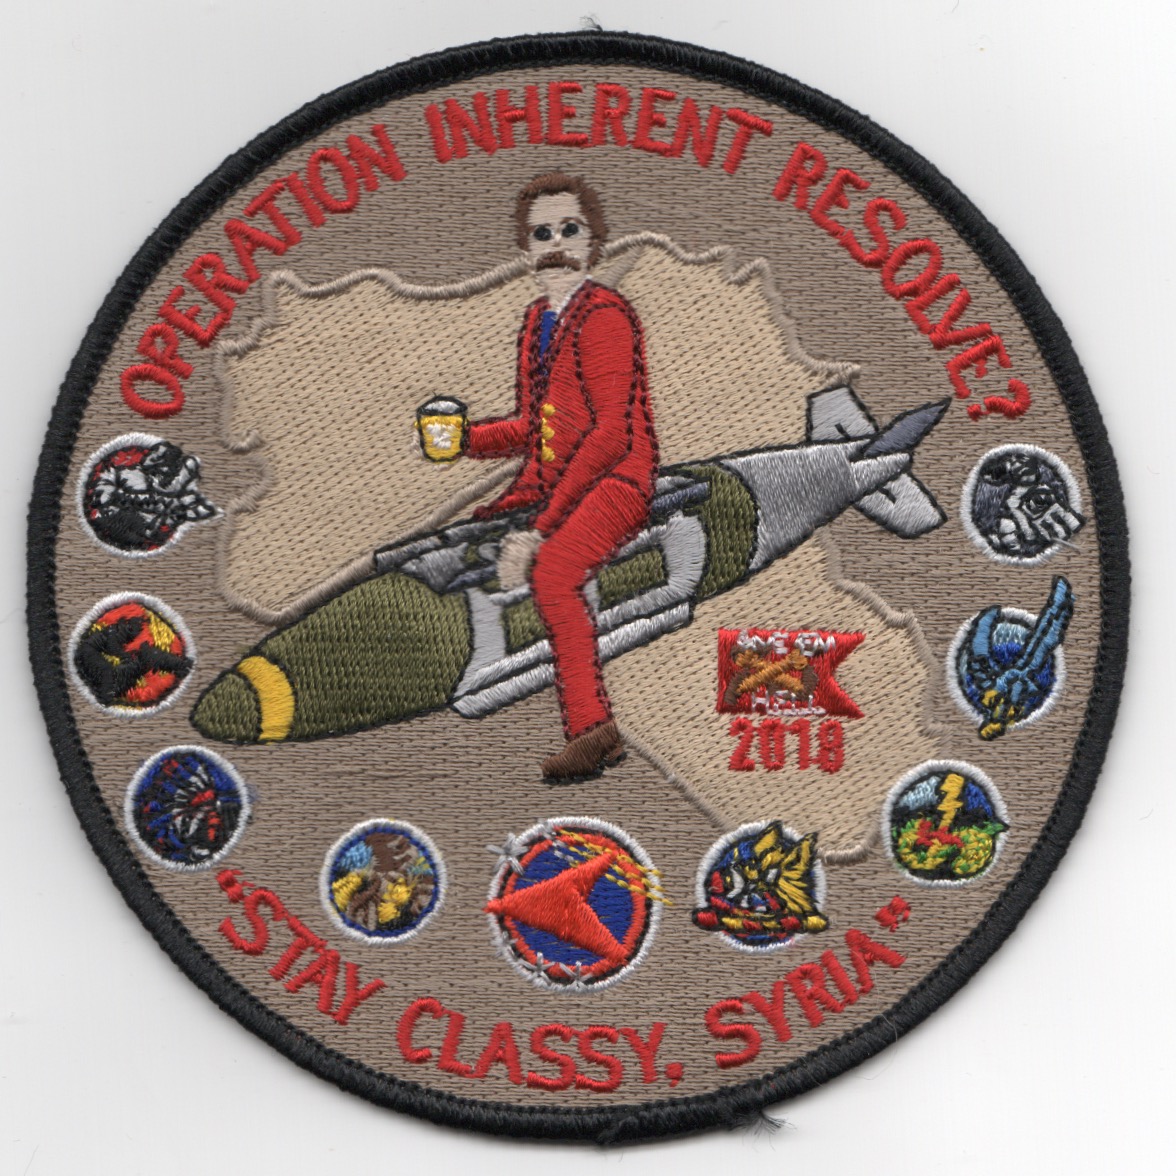 VFA-81 2018 OIR 'STAY CLASSY' Cruise Patch